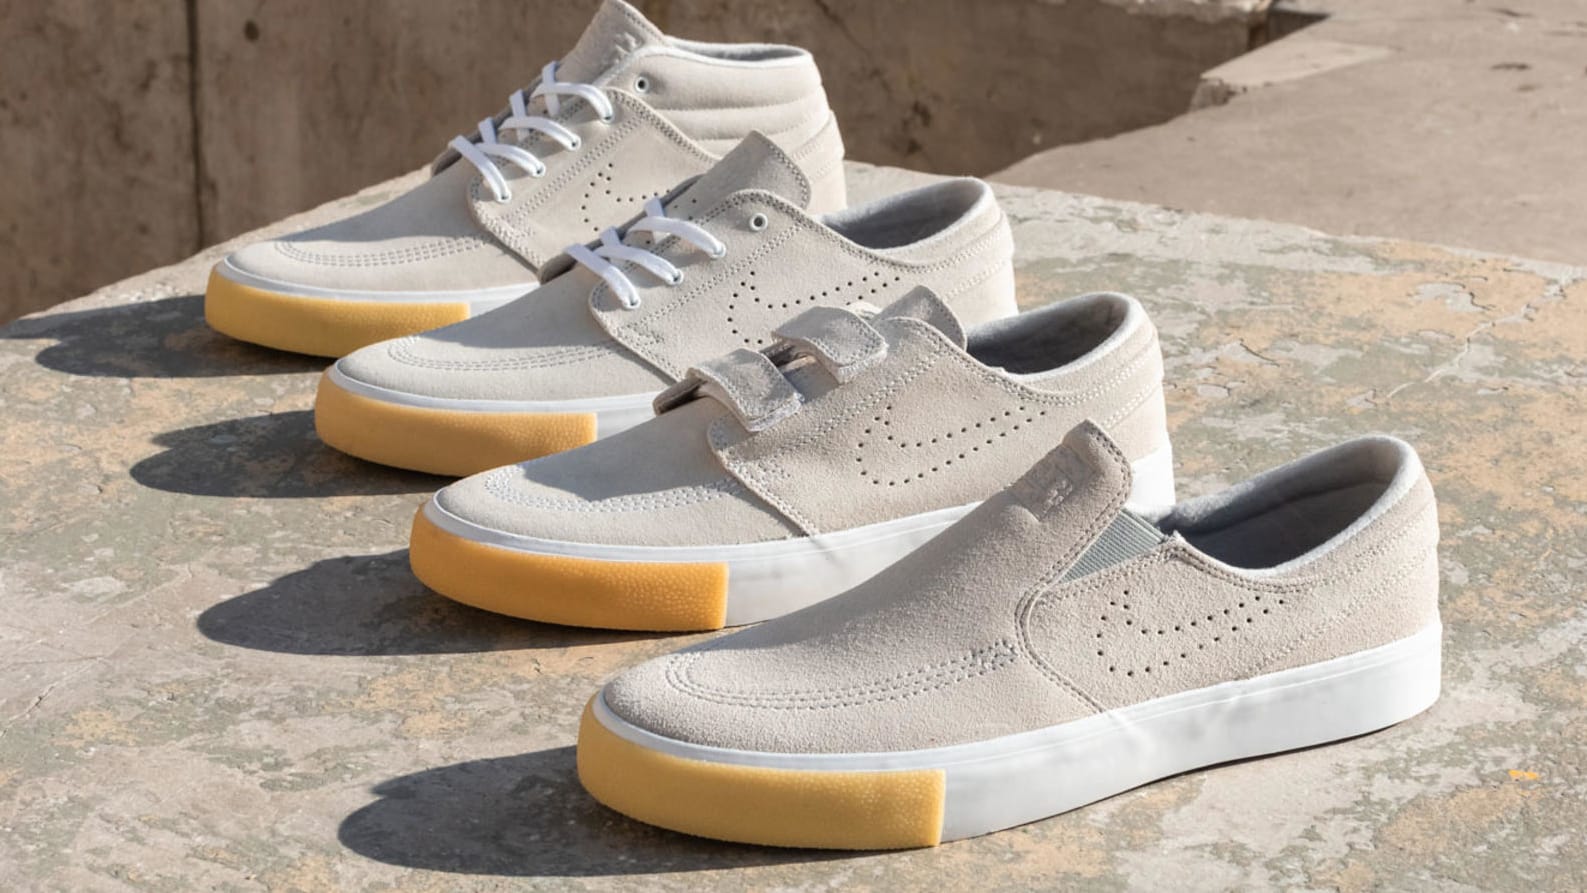 Nike SB Zoom Stefan Janoski Remastered (RM) Collection Release Date